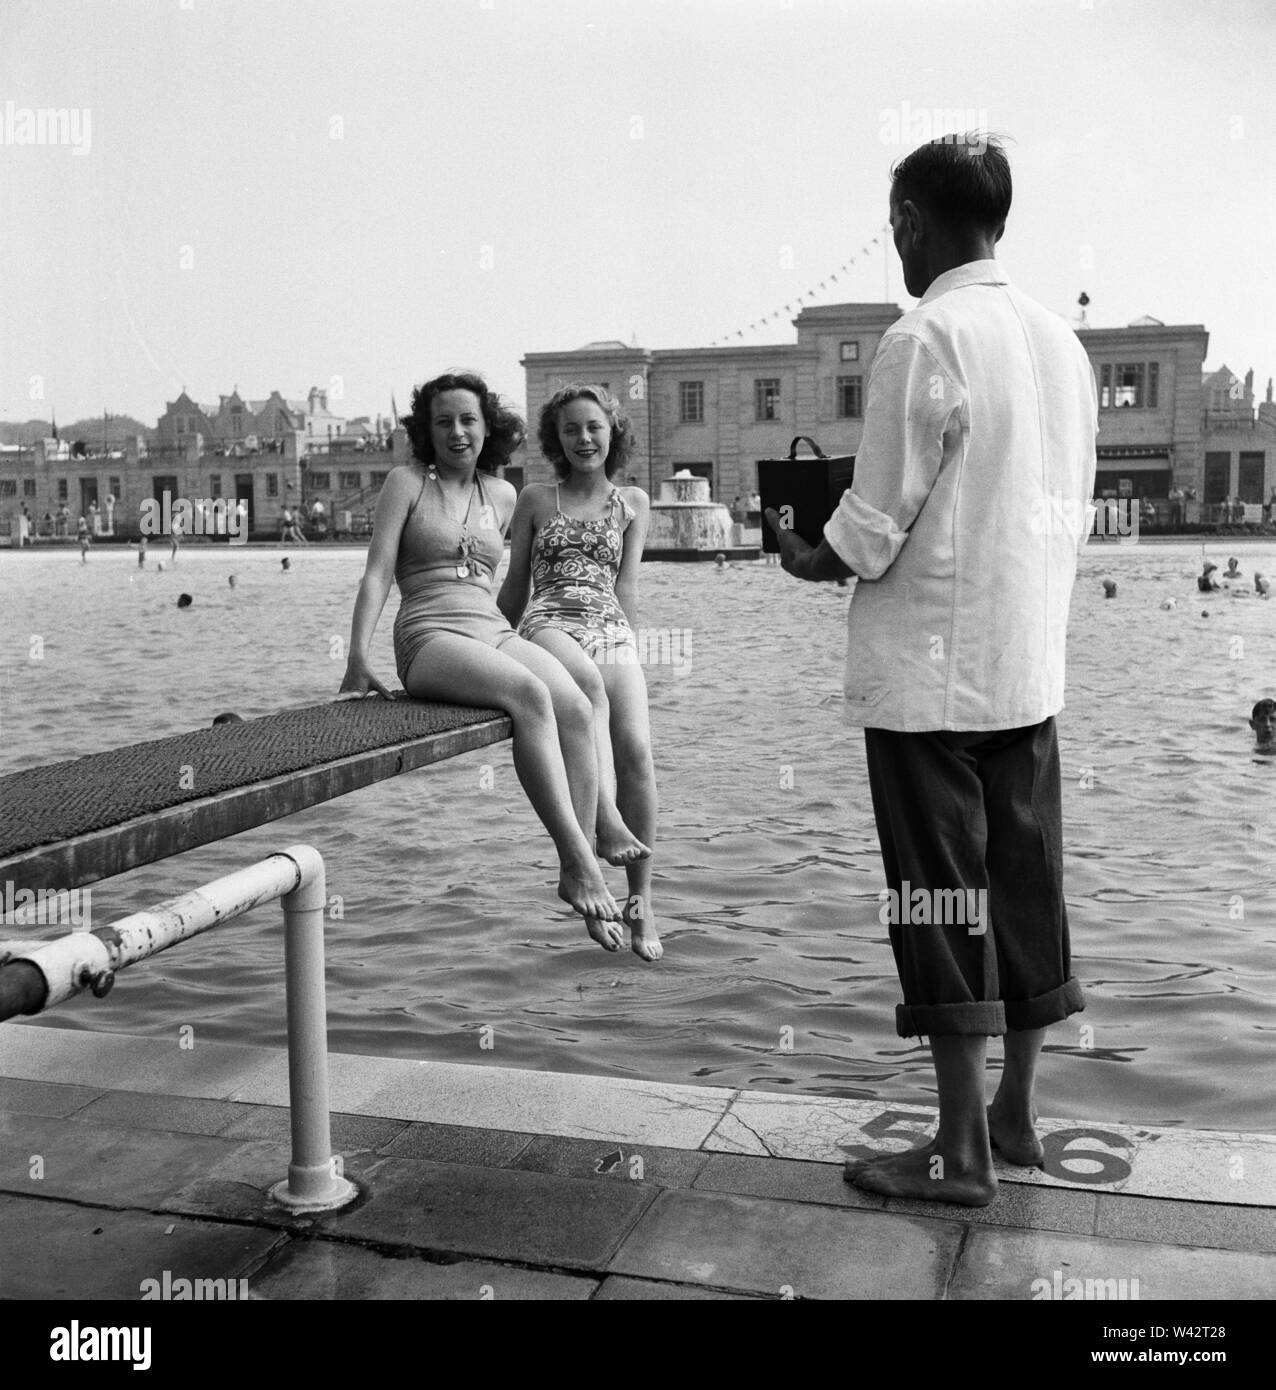 Holiday scenes in Weston-super-Mare, Somerset, England. 26th August 1949. Stock Photo